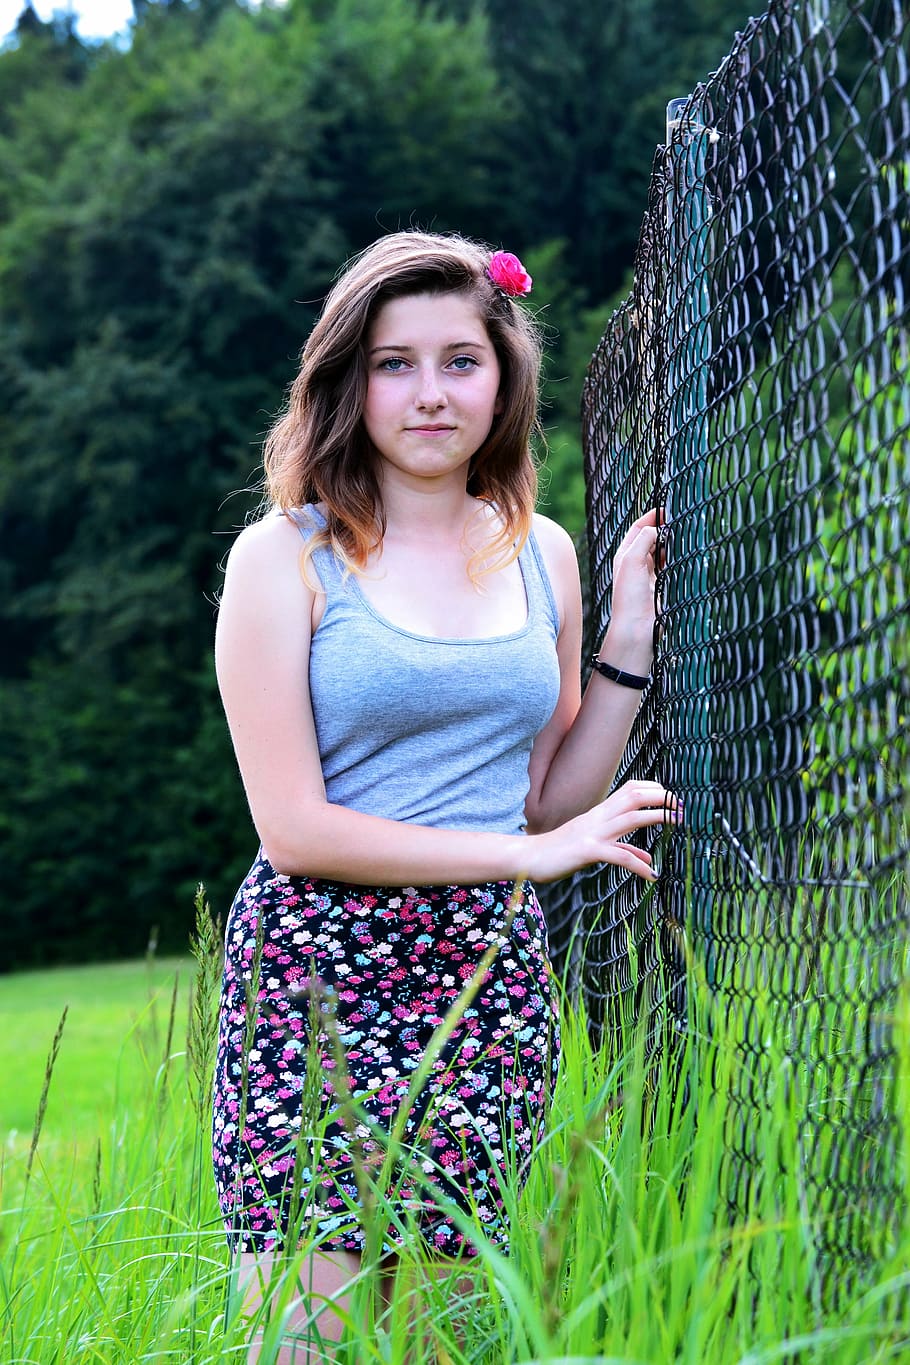 woman, chain link fence, standing, daytime, girl, summer, nature, plant, leisure activity, one person